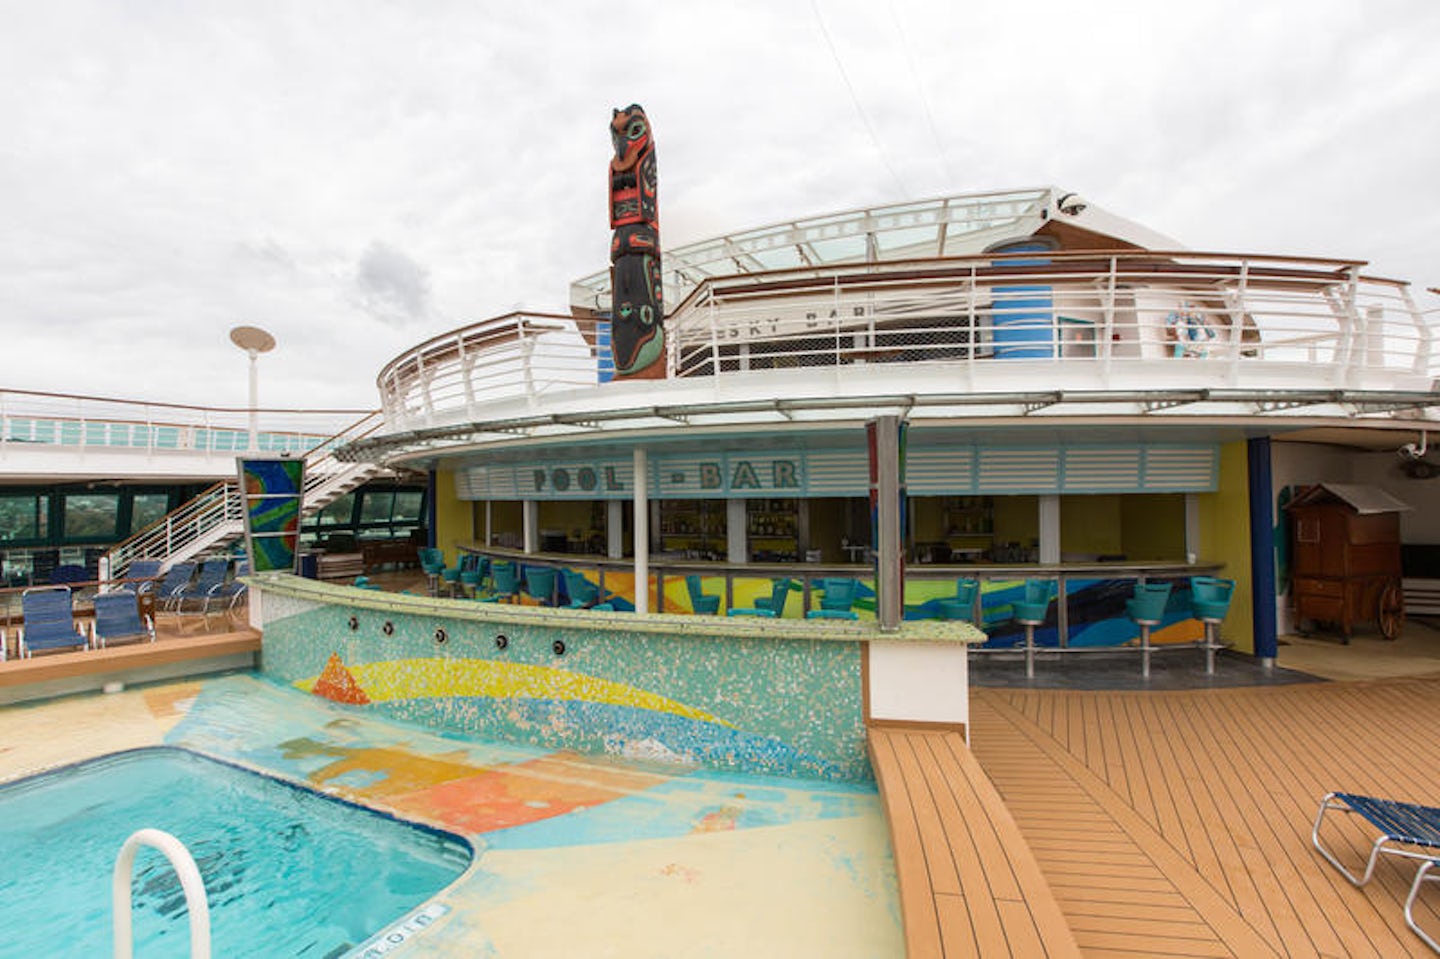 The Main Pool on Radiance of the Seas